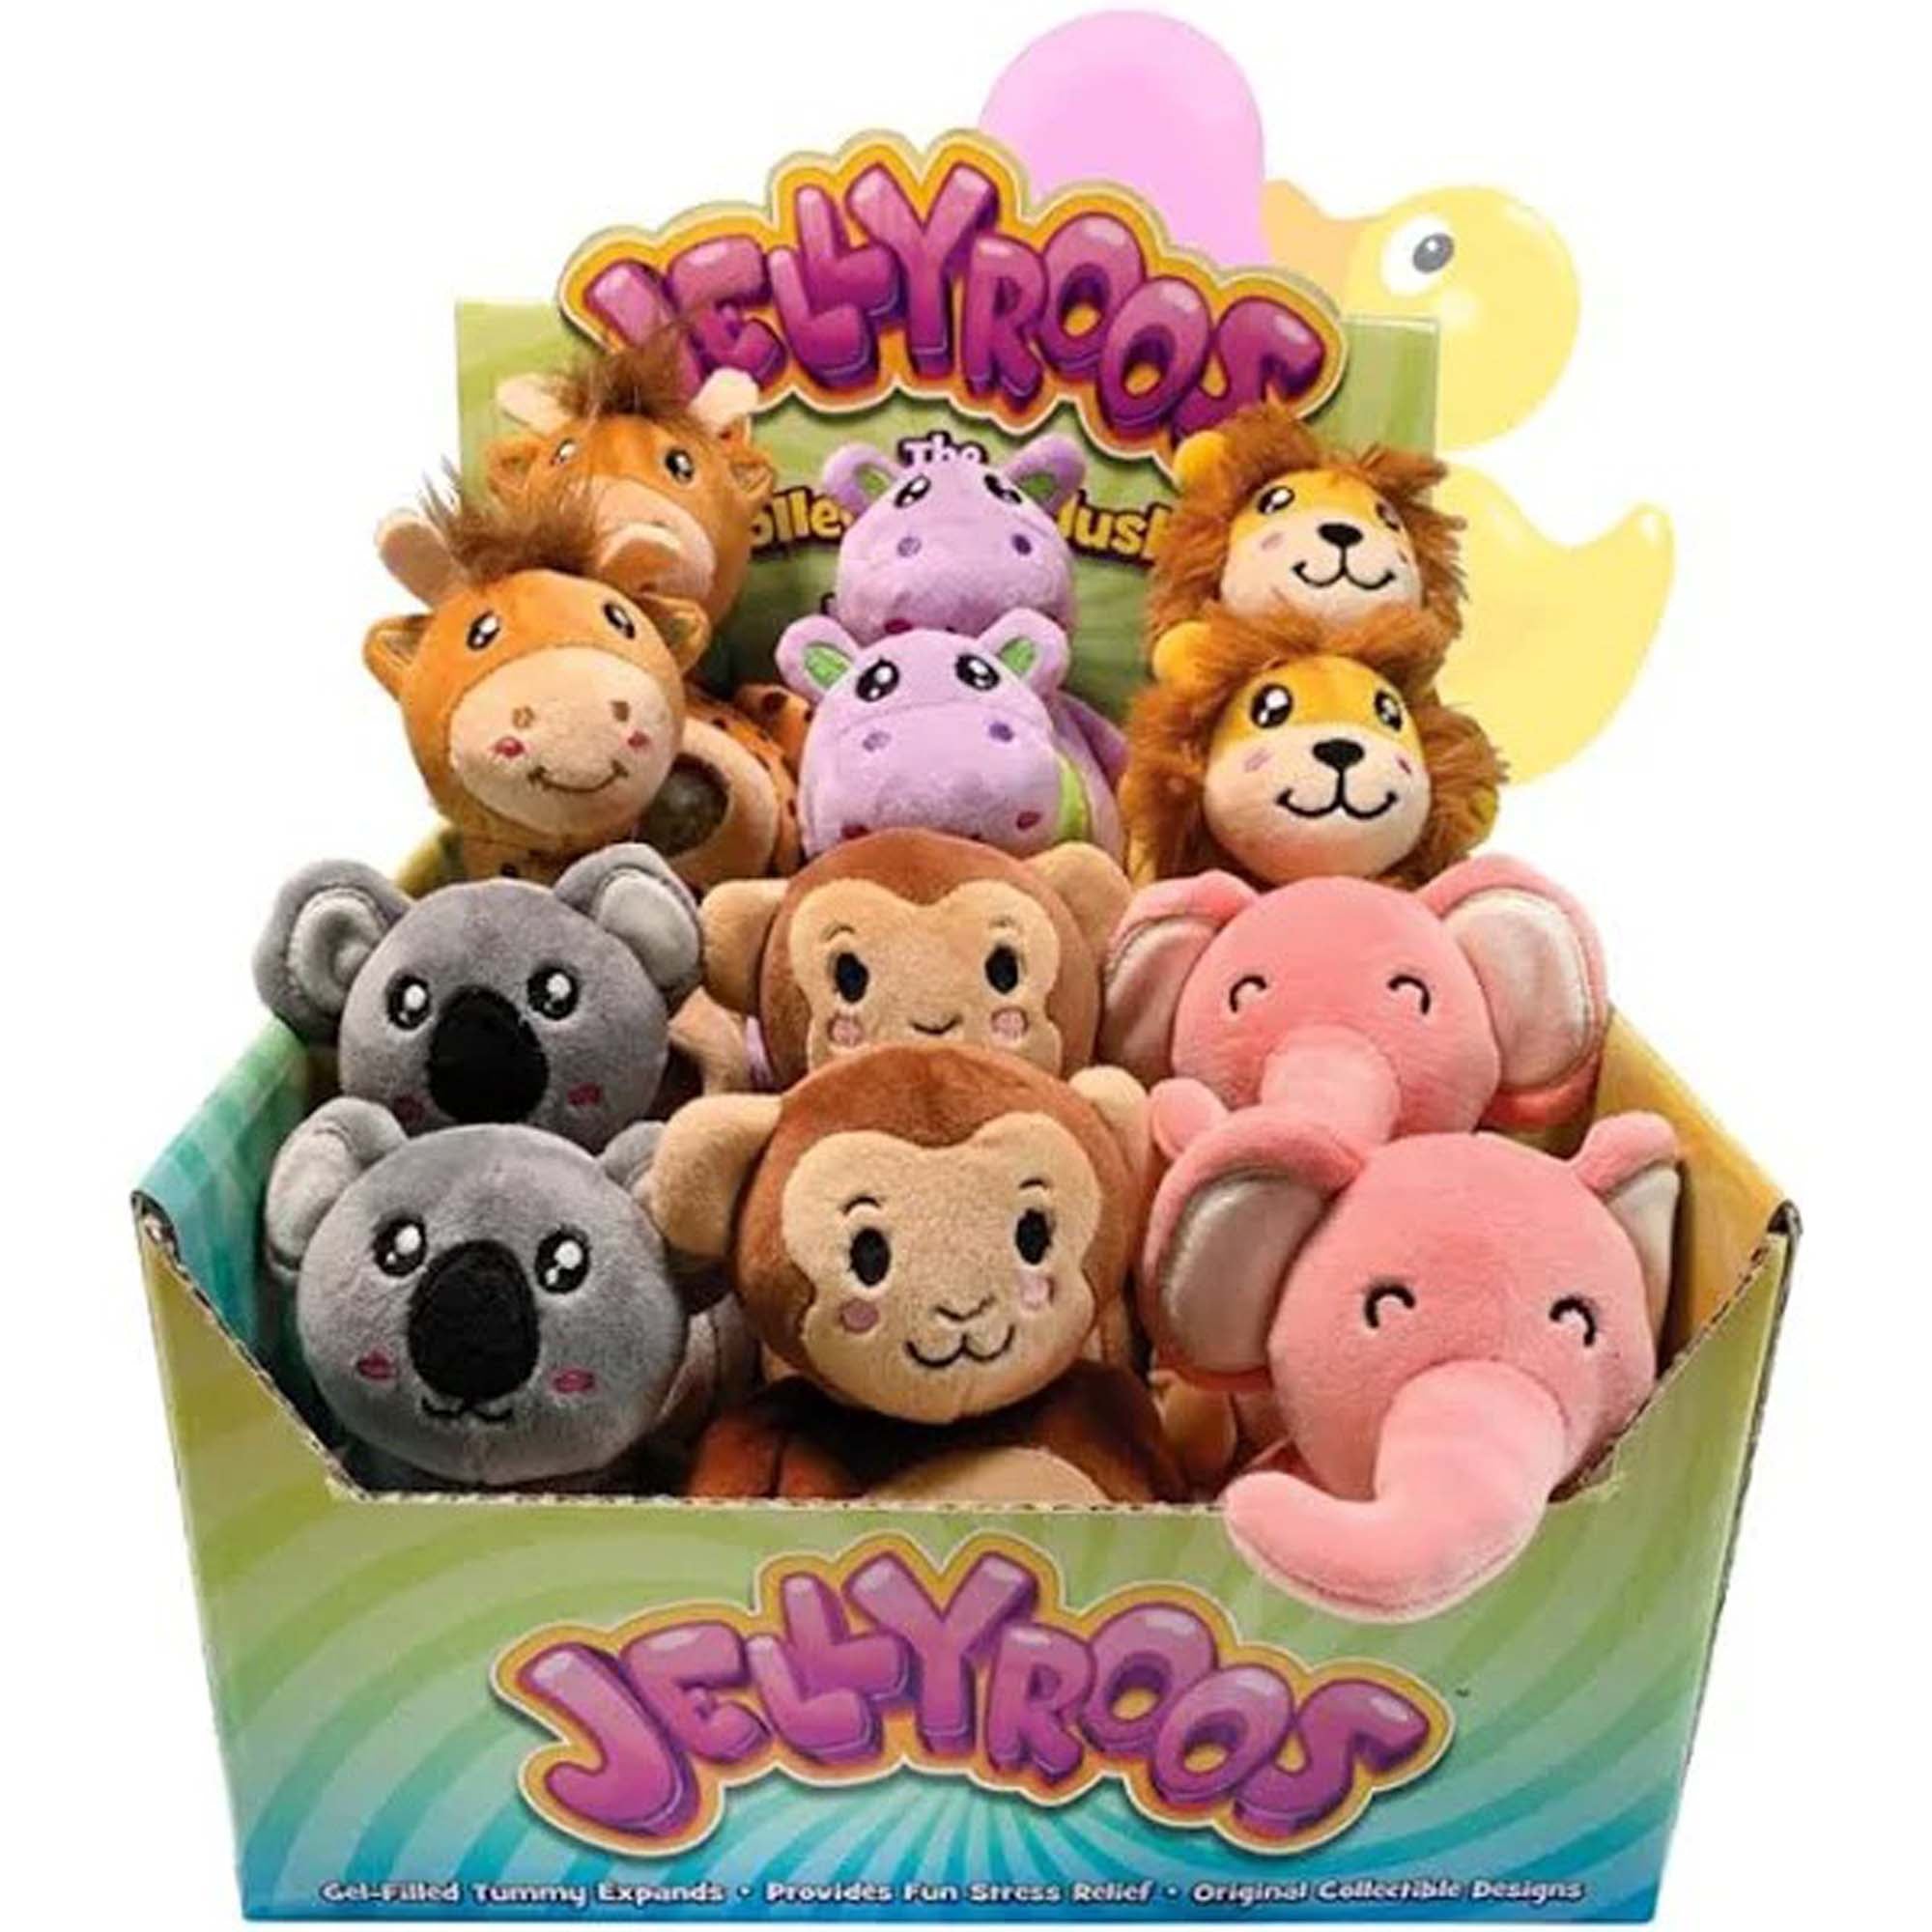 Jellyroos Jungle Collectible Plush, Assortment, 1 Count